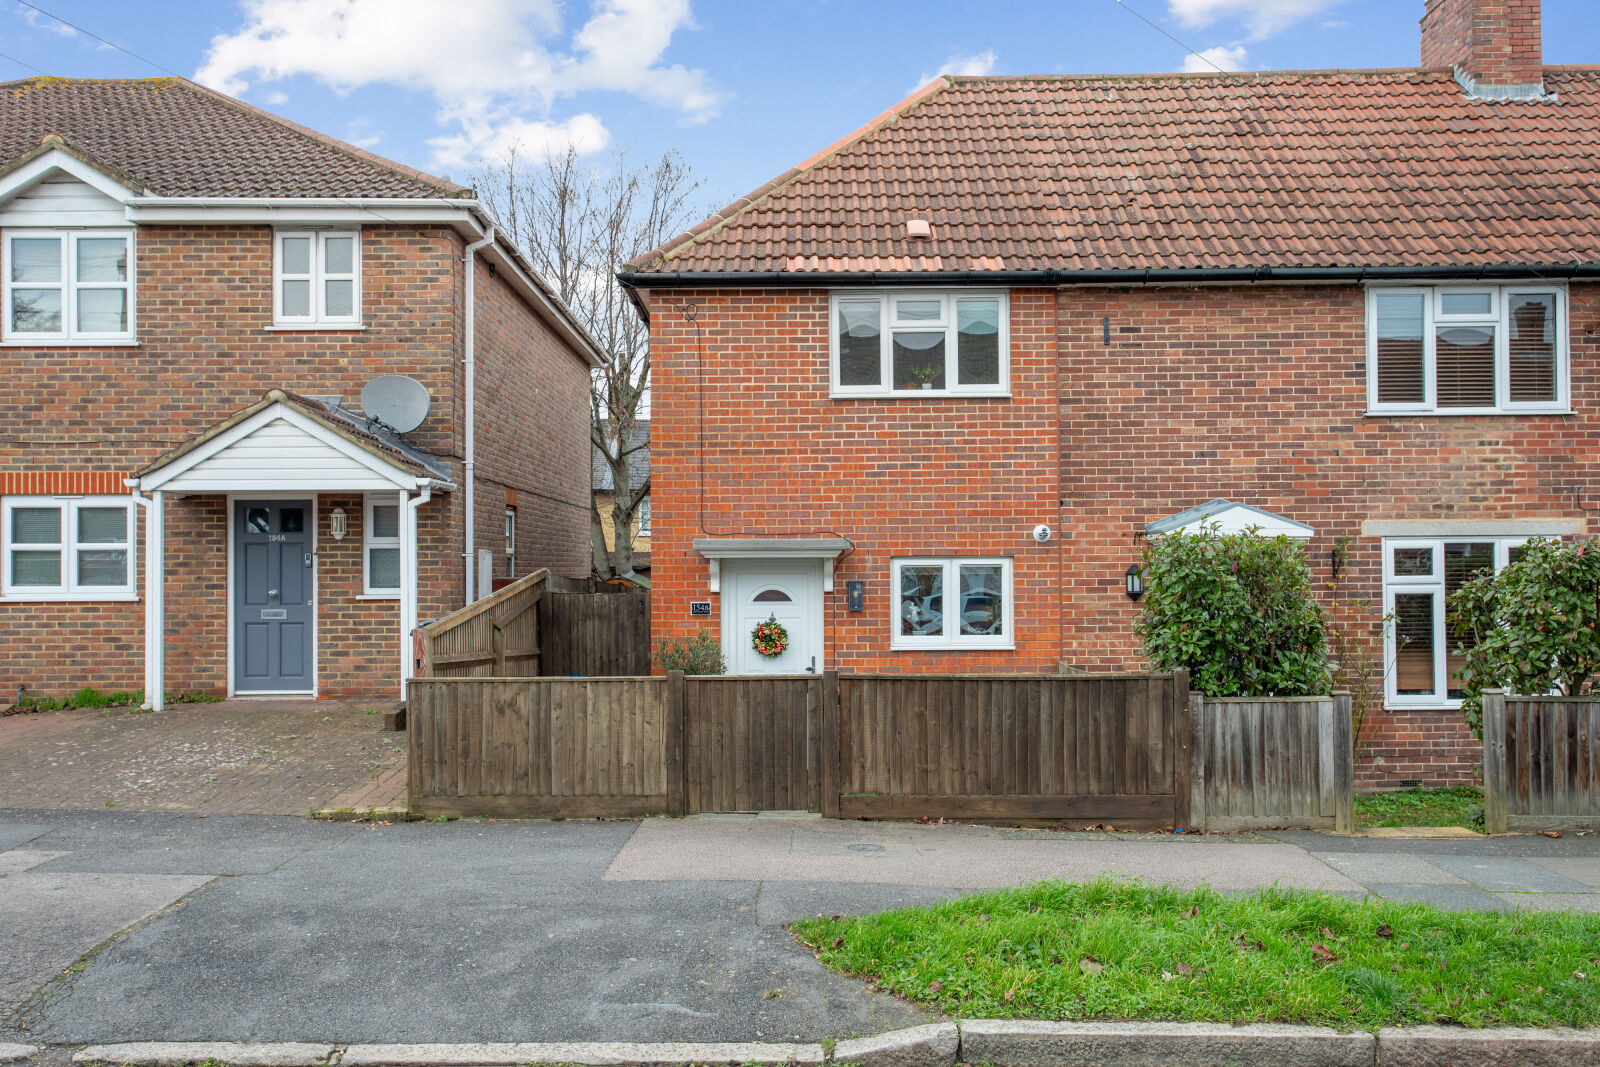 2 bedroom end terraced house for sale Abbotsbury Road, Morden, SM4, main image